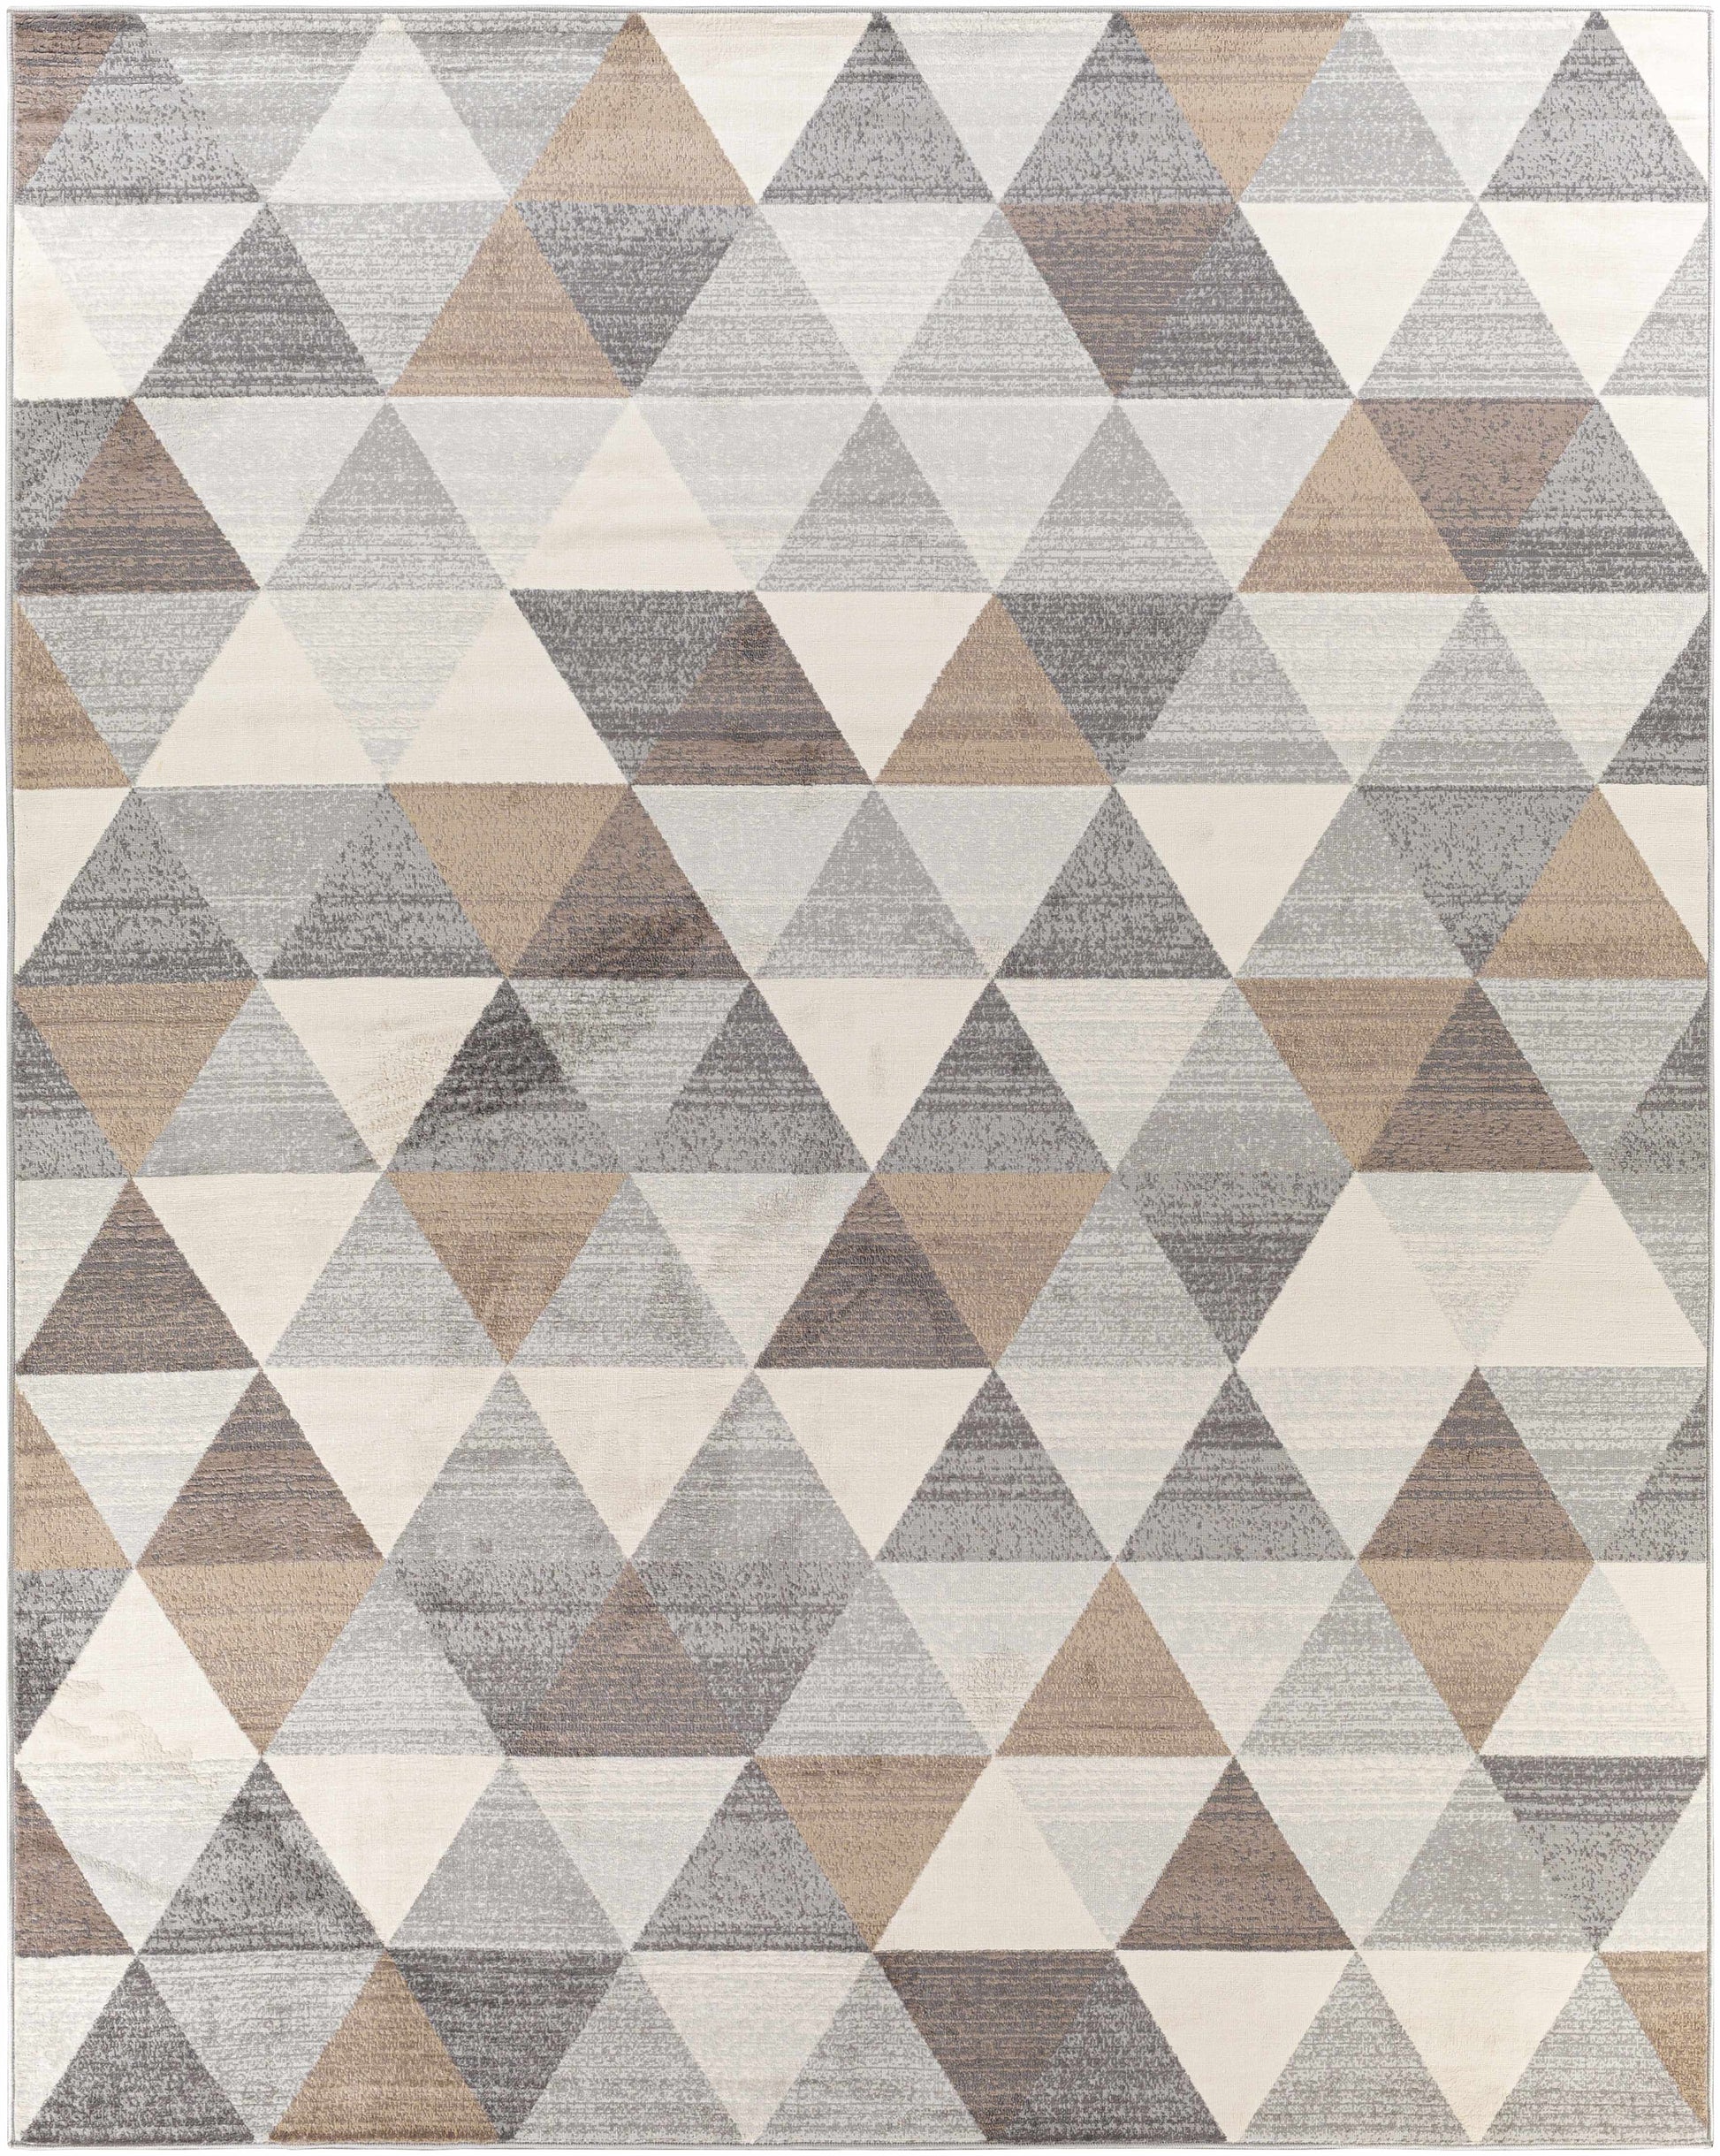 Boutique Rugs Rugs 7'10" x 10' Rectangle Sells Area Rug